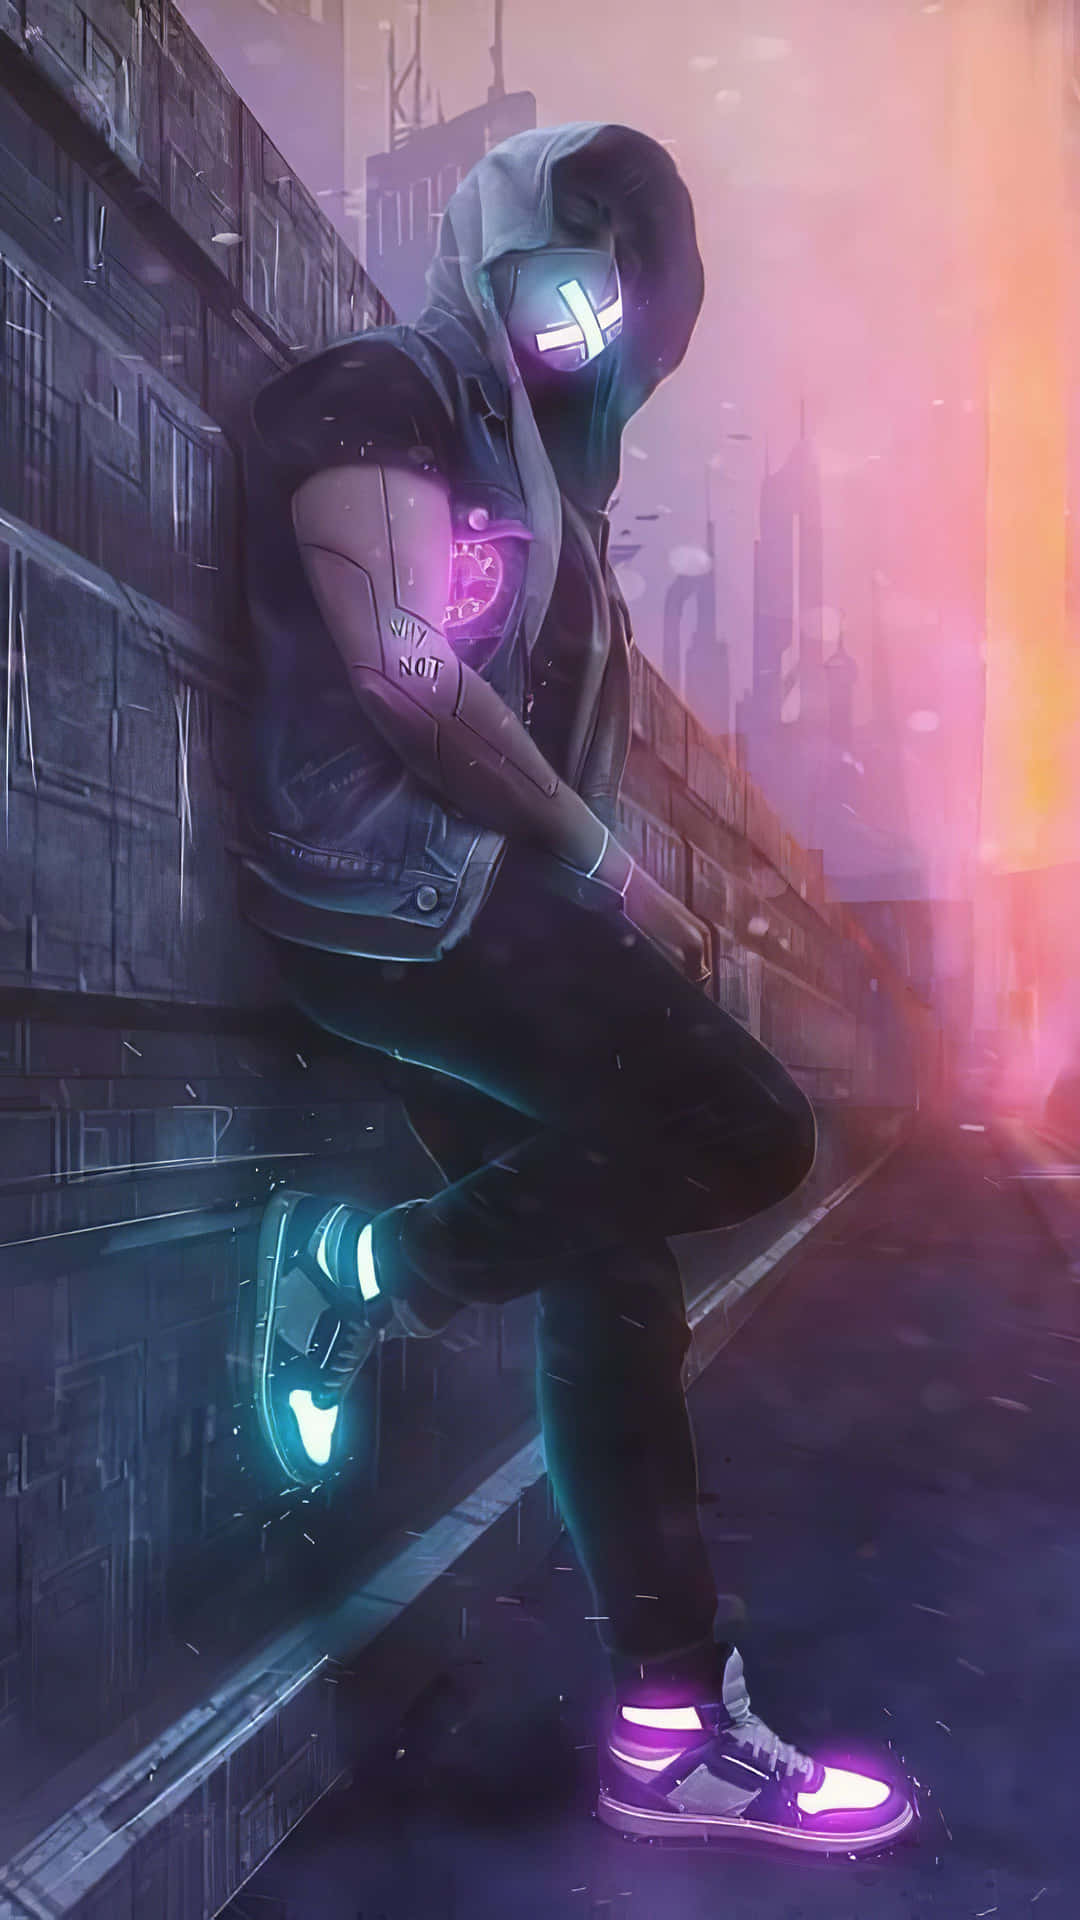 Anime Neon Boy With Mask Background